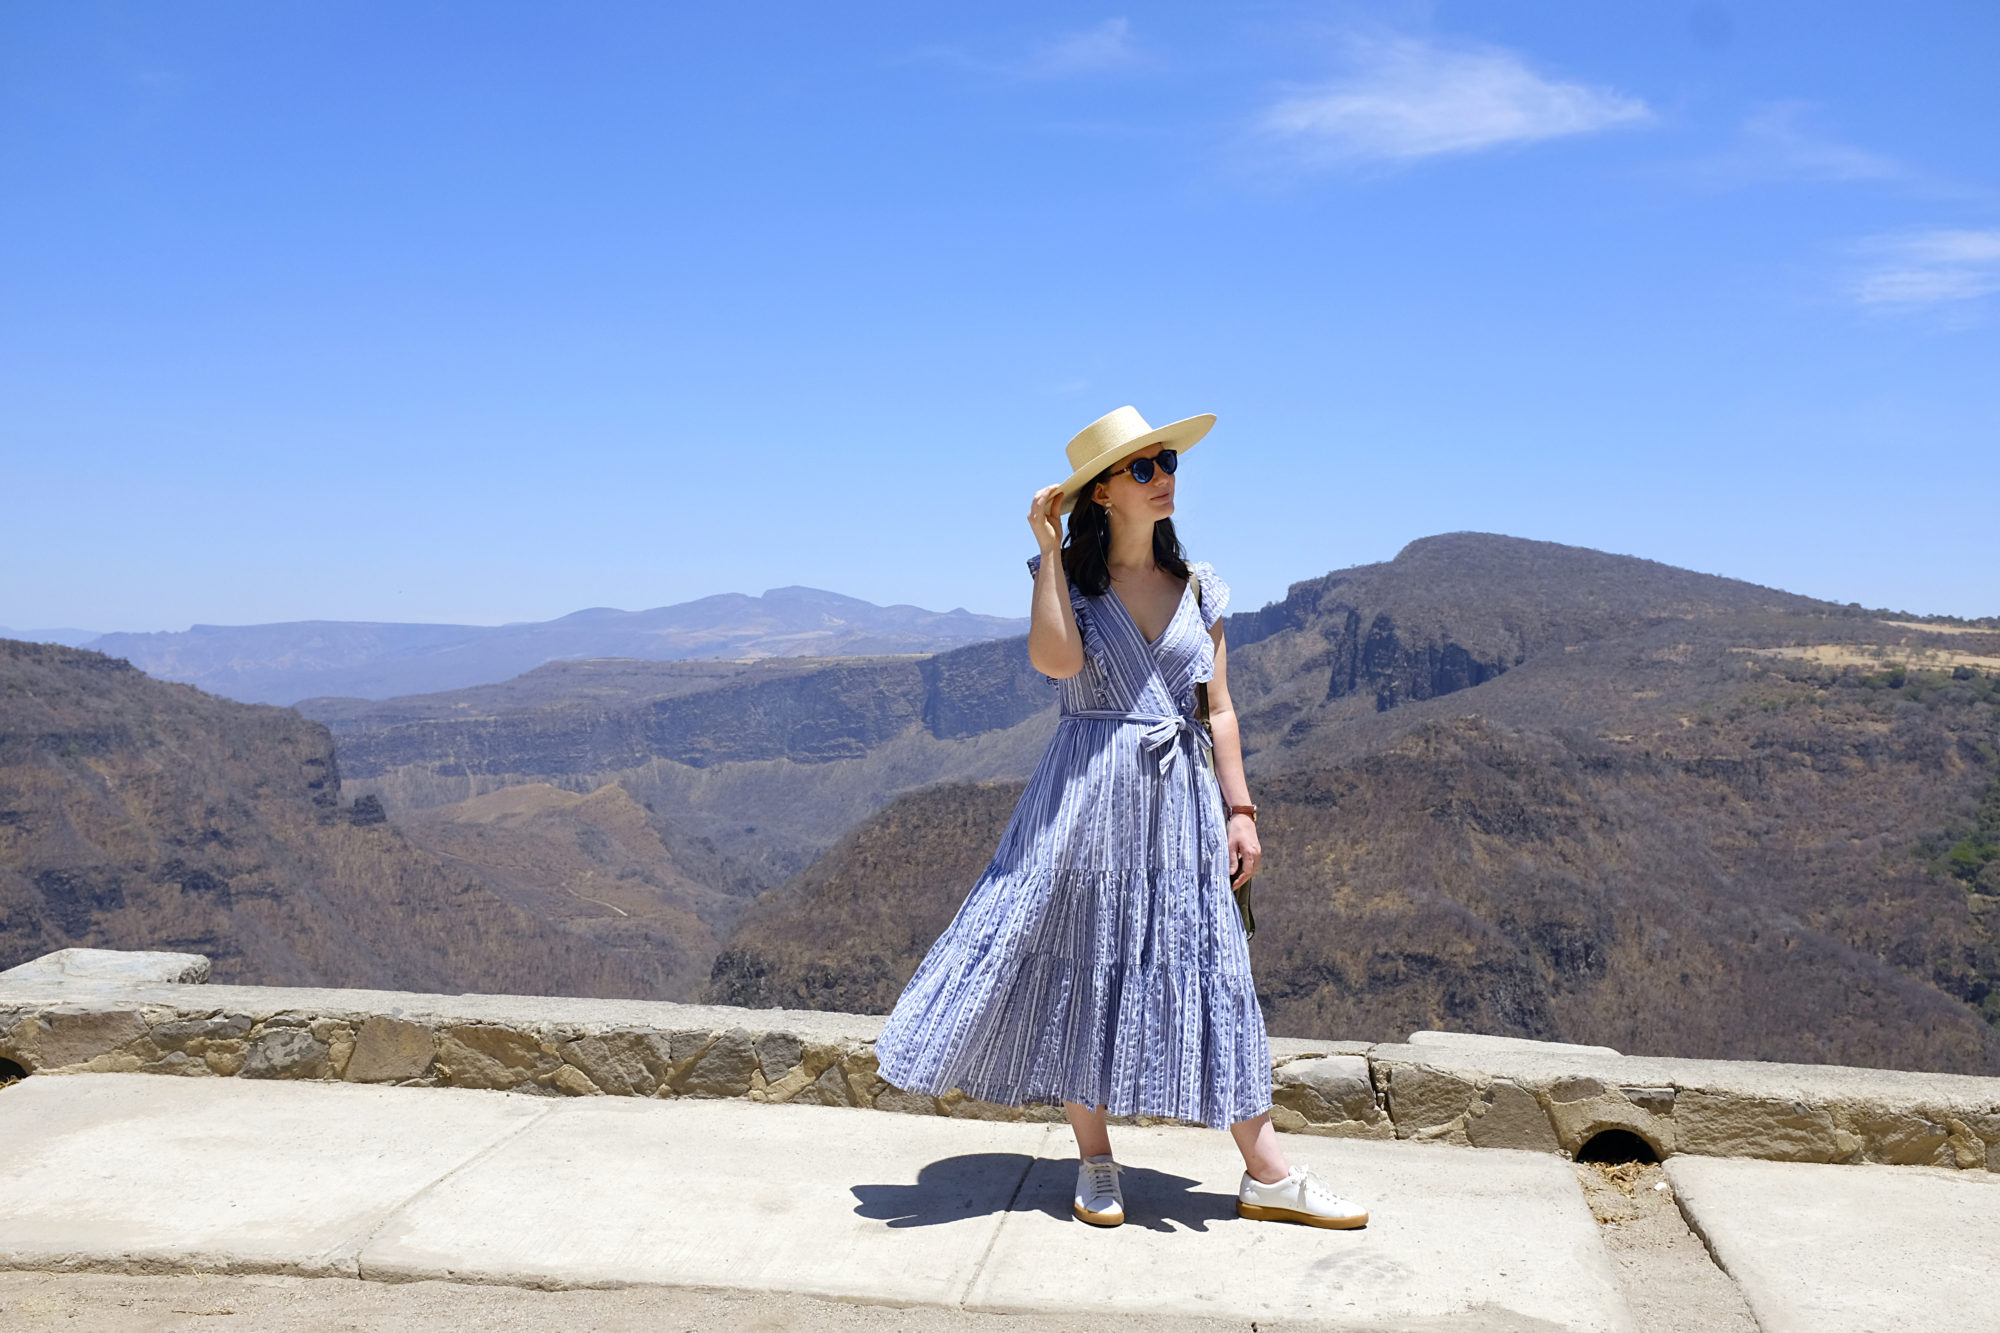 Alyssa stands in front of a canyon in a blue dress